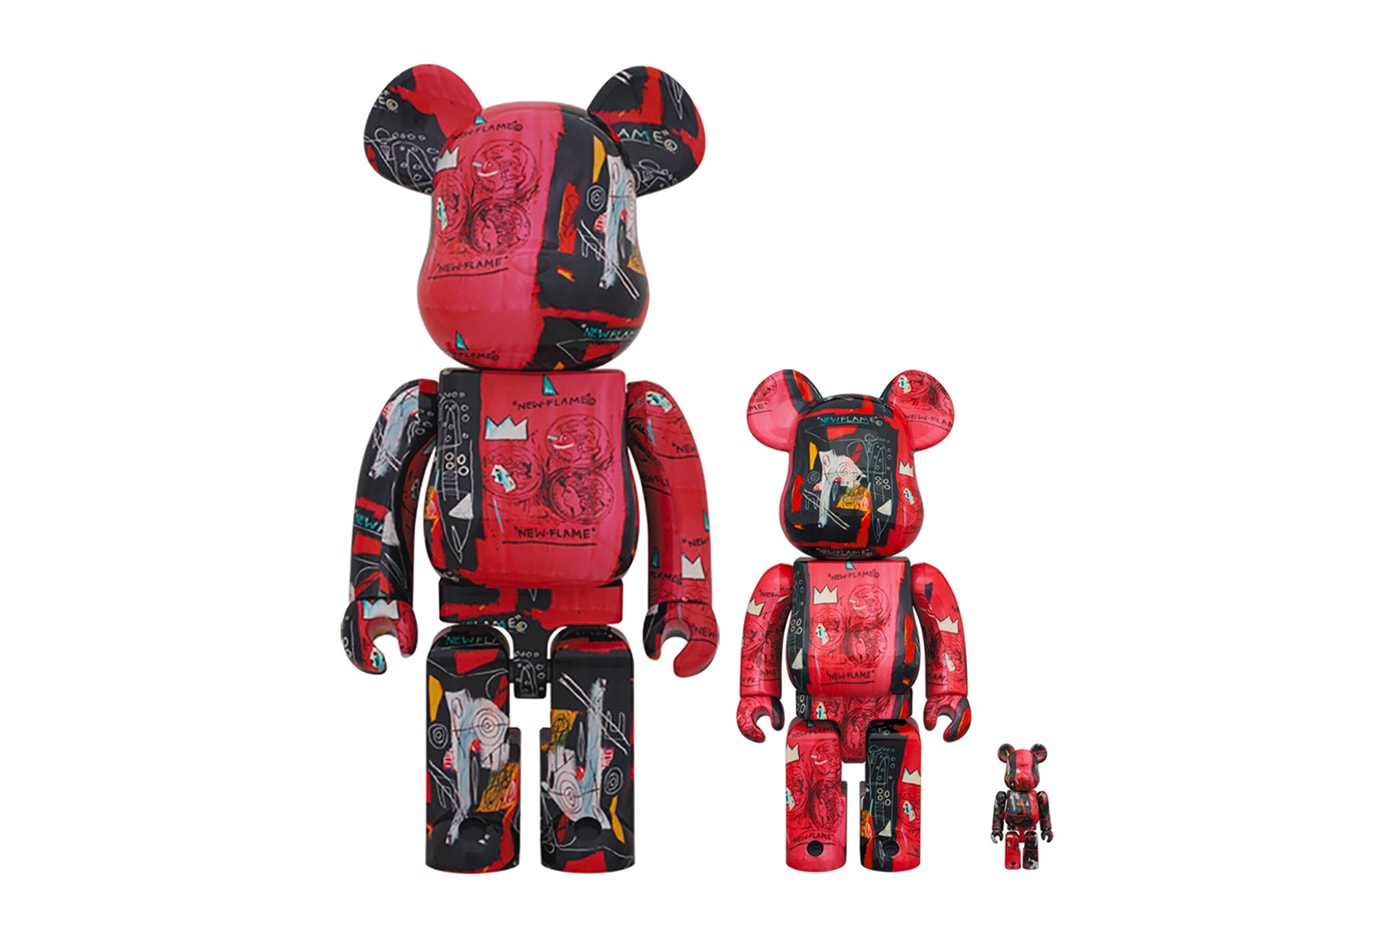 medicom toy andy warhol jean michel basquiat bearbrick 100 400 1000 figures toys accessories collectibles ss21 collection spring summer 2021